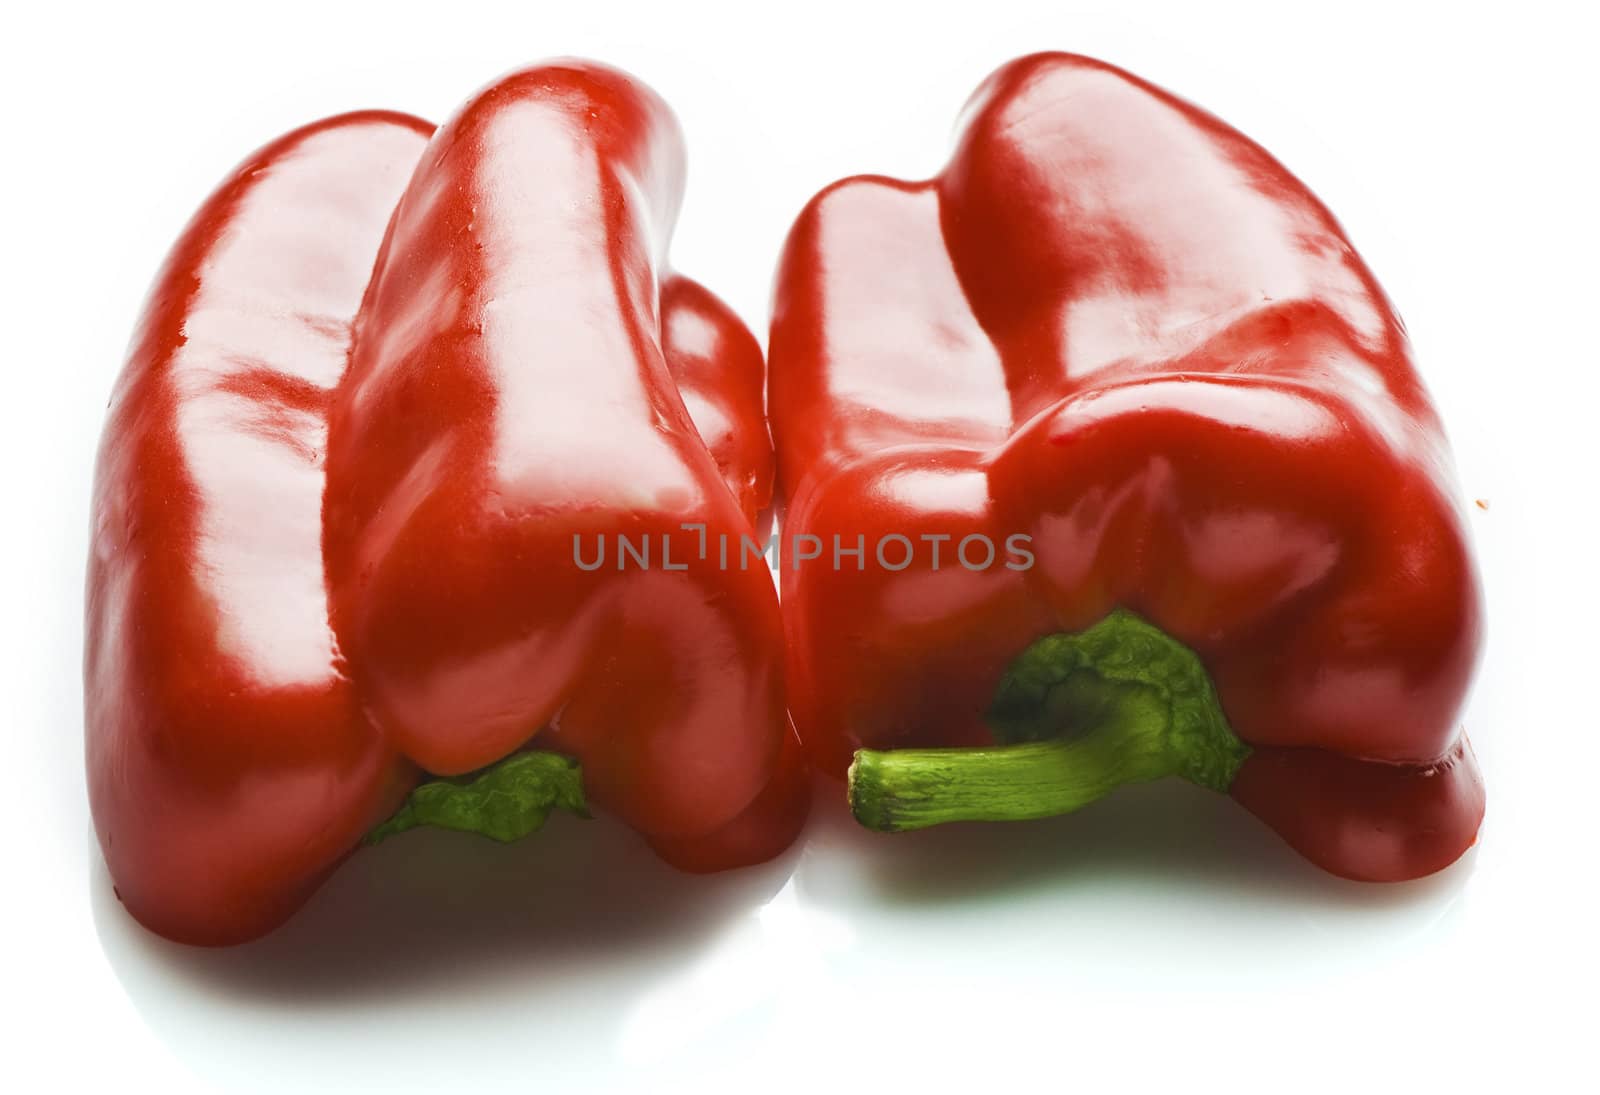 A red capsicum cut in half. Isolated on white.